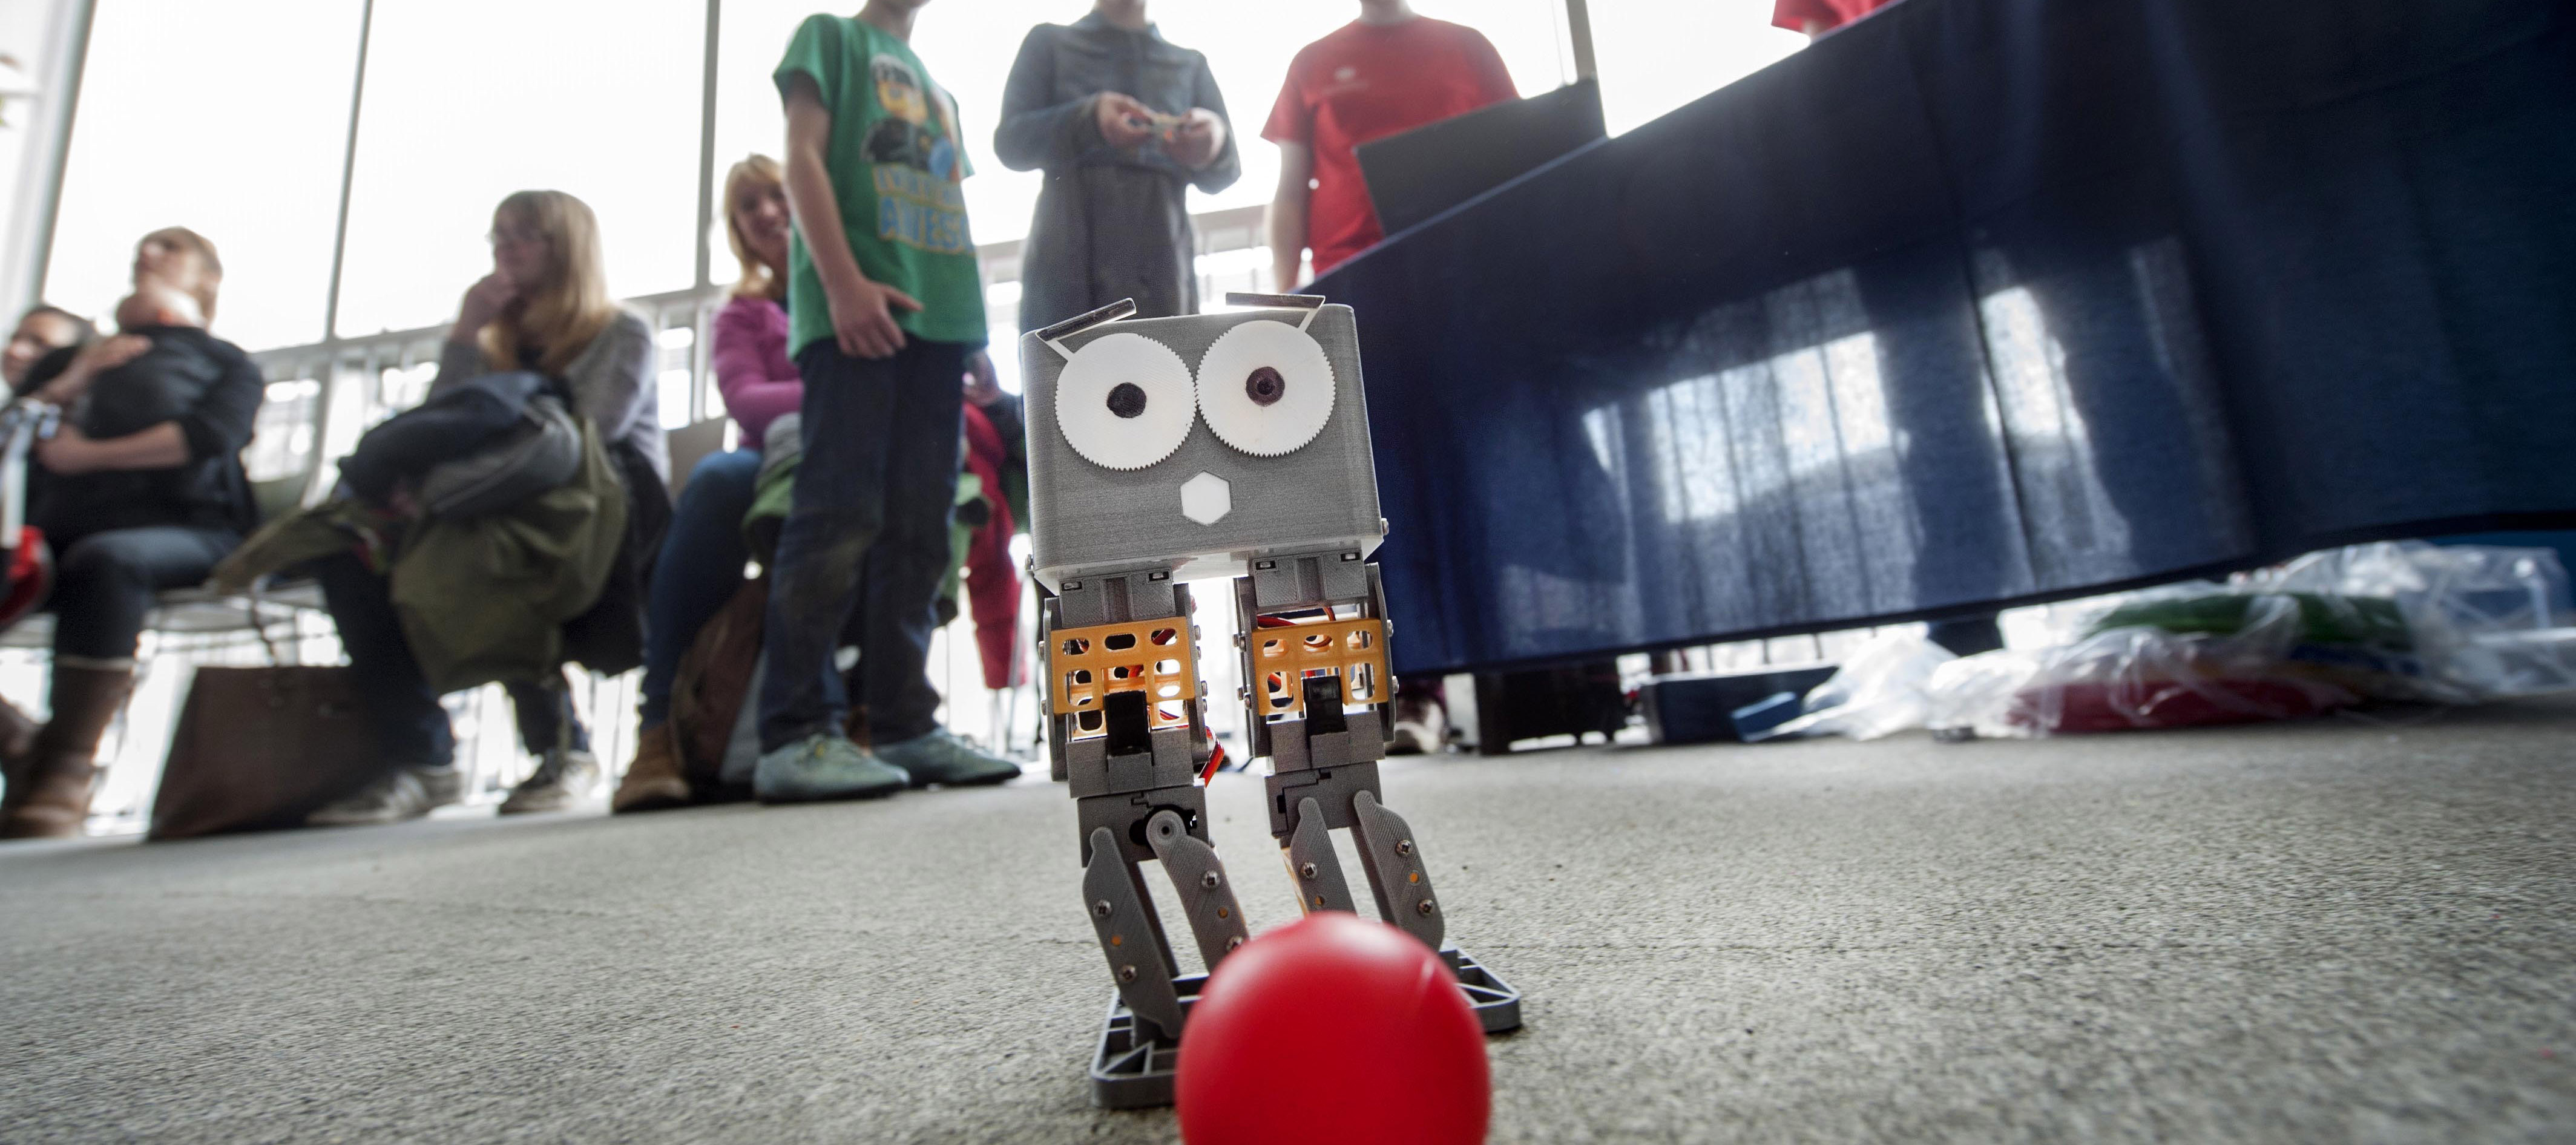 A robot controlled by children plays with a football